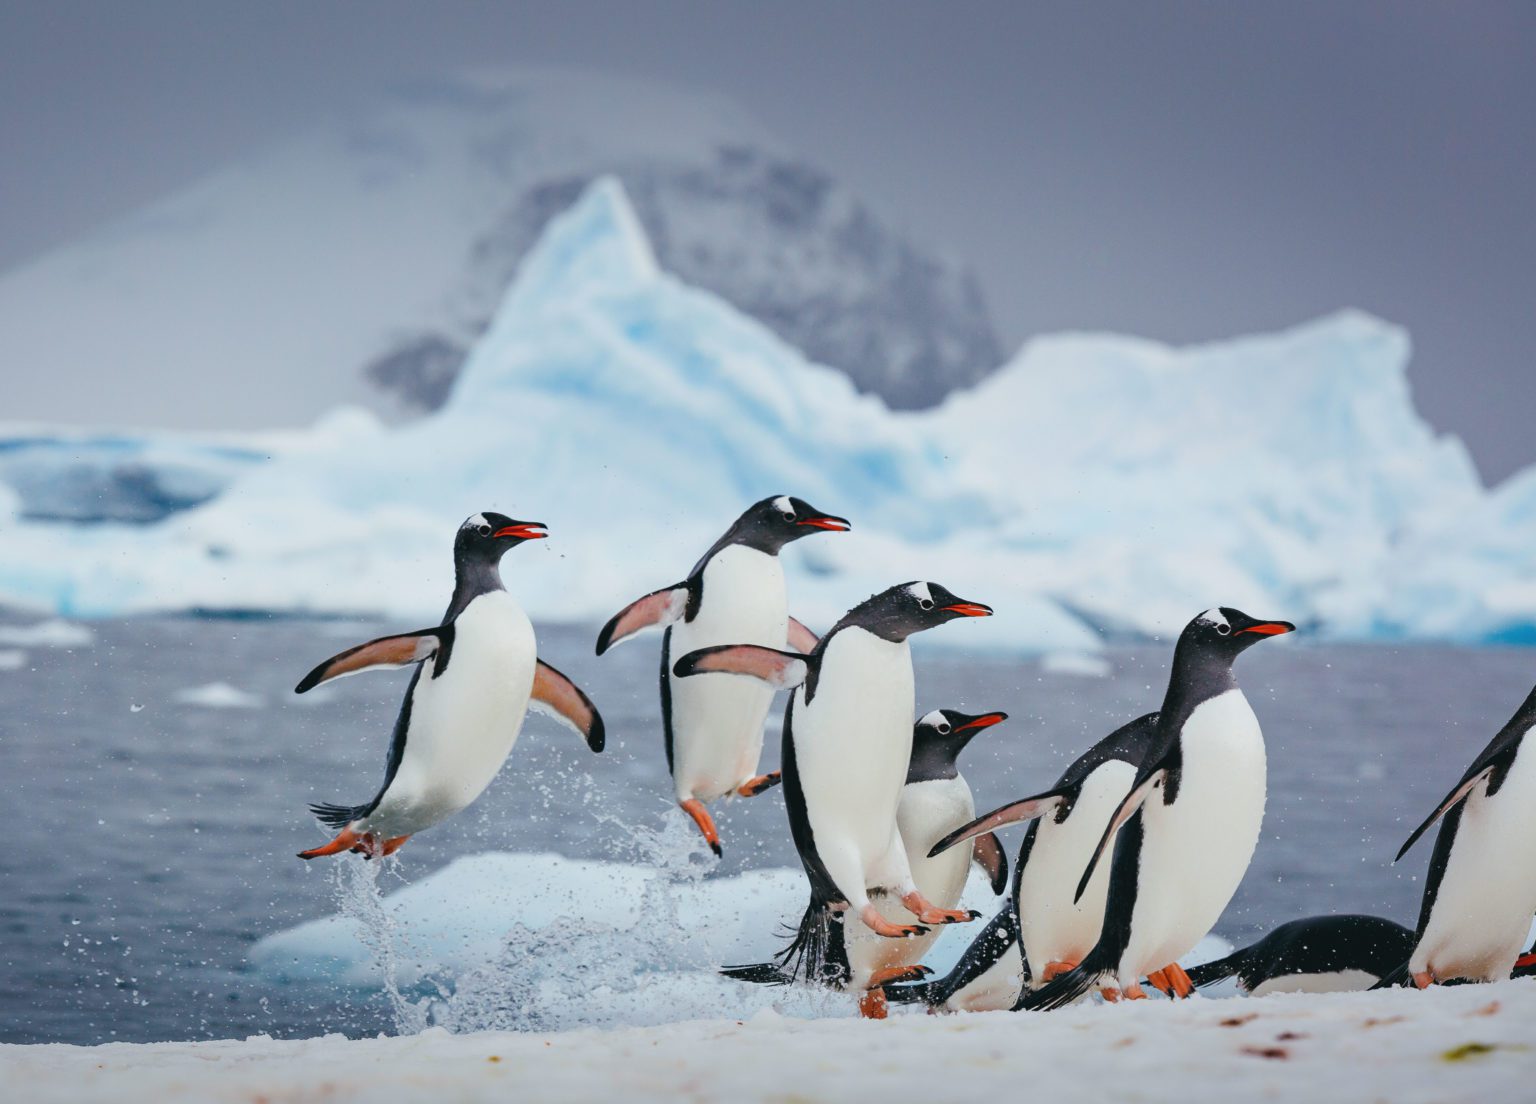 penguins returning to the shore after an icy swim in the Antarctic waters